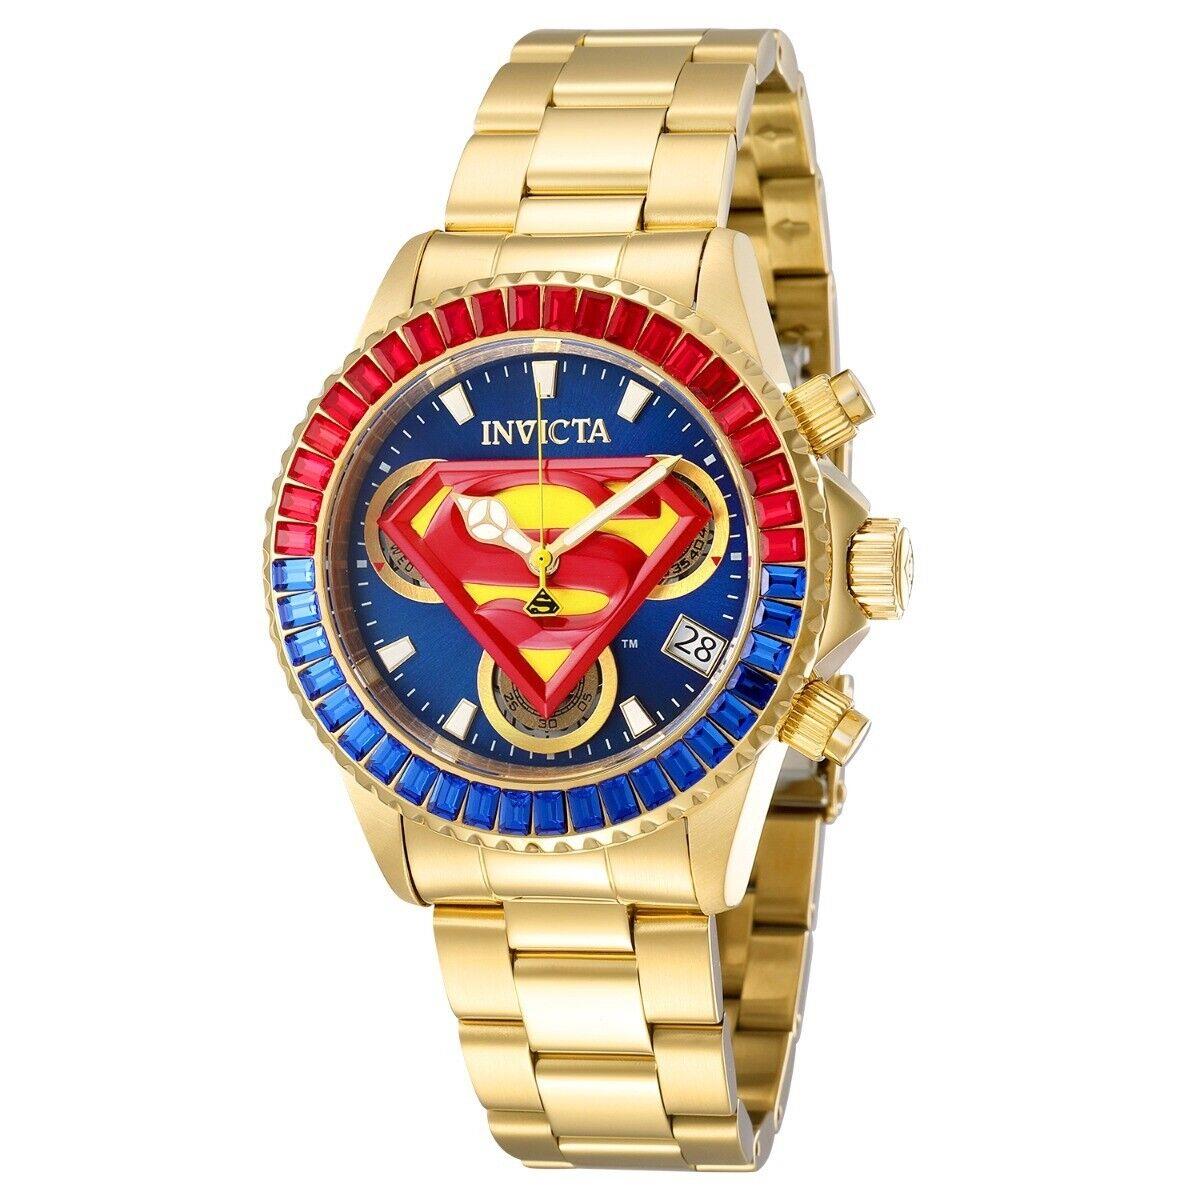 Invicta 41268 DC Comics Superman Red Blue Yellow Dial Gold Tone Womens Watch - Dial: Blue, Band: Gold, Bezel: Gold